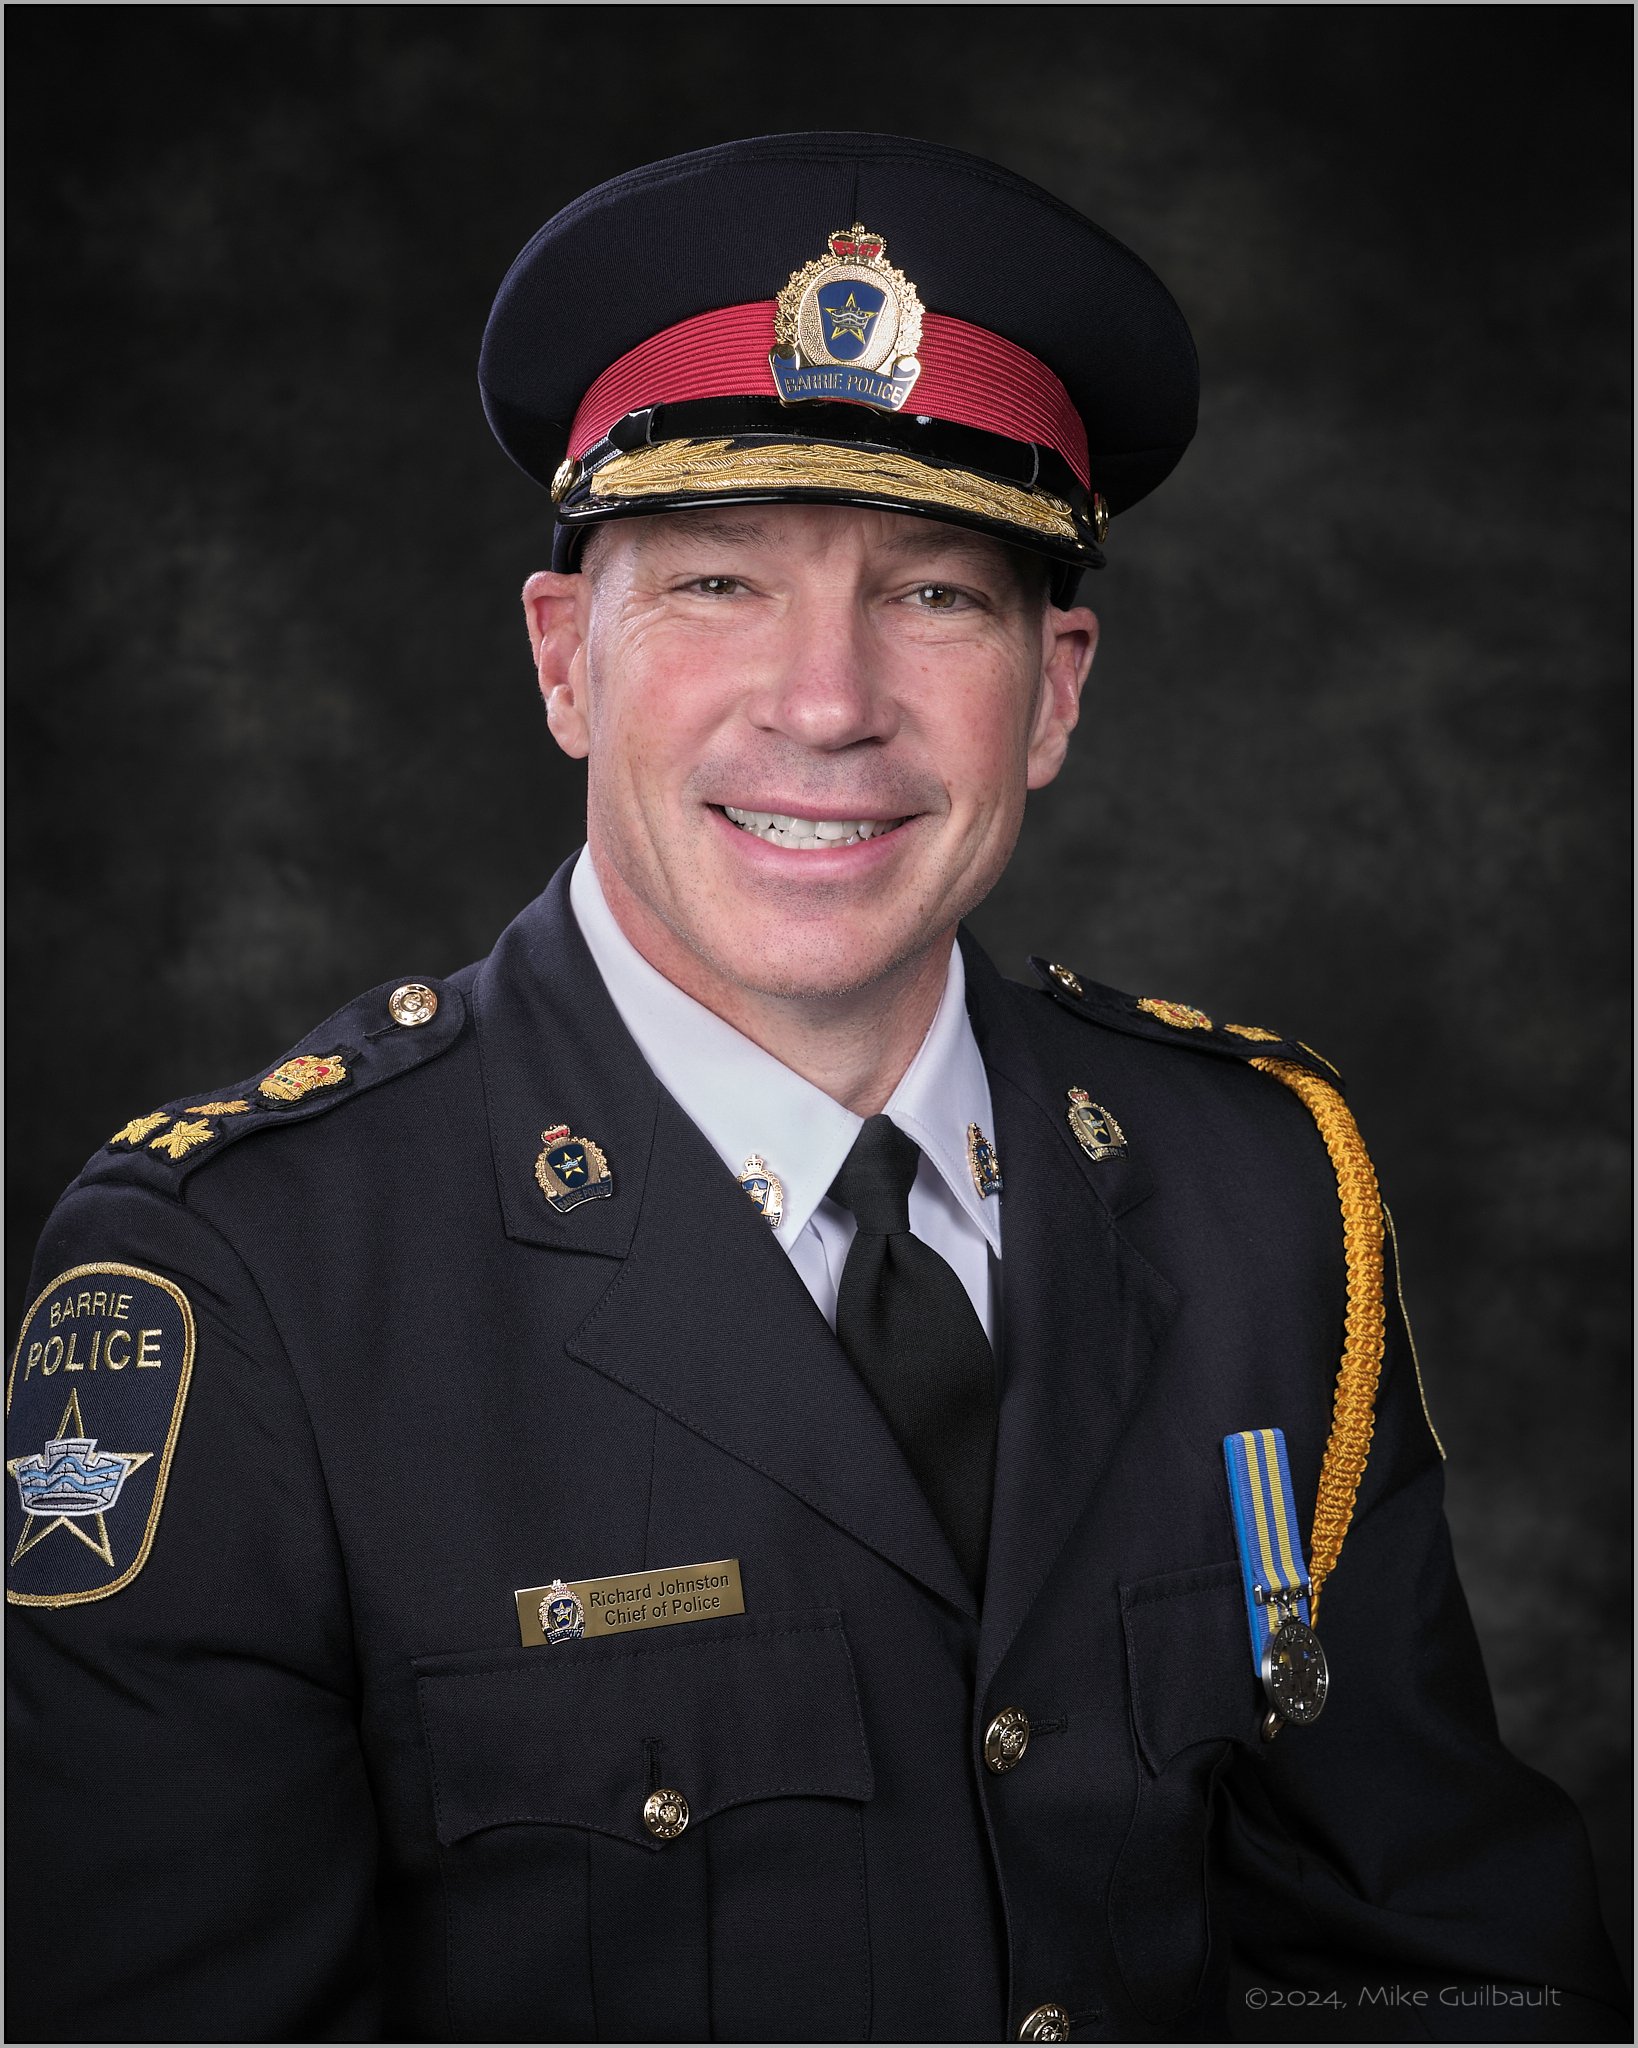 Barrie Chief of Police